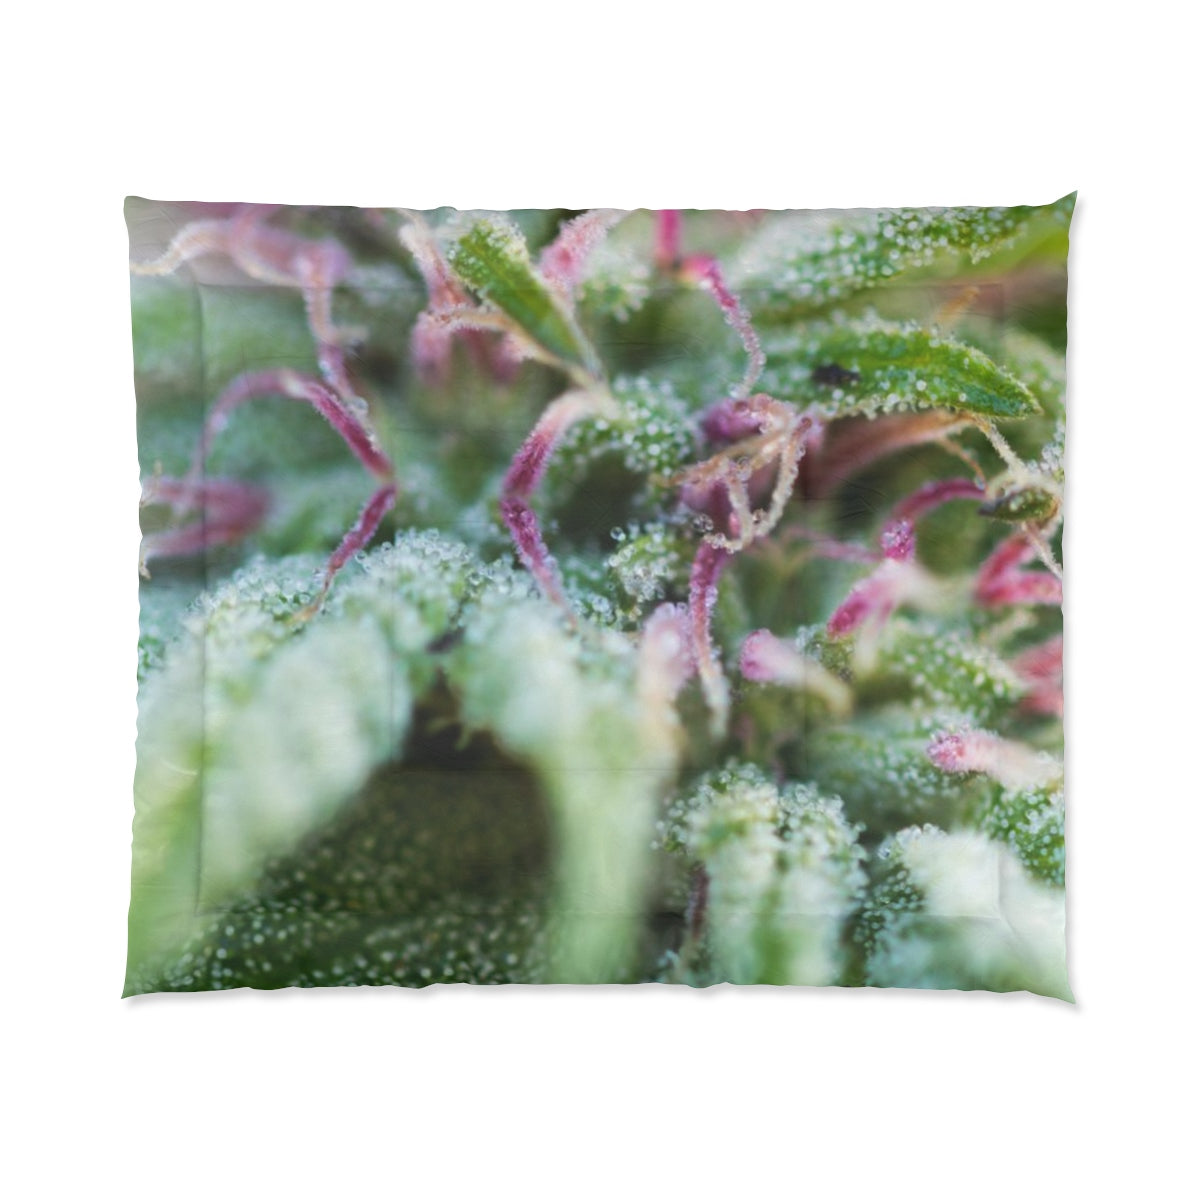 Blooming With Purple Cannabis Custom Designed Comforter.  A Unique Cannabis Gift For Friends & Family. Cannabis Decor For Your Home. Cannabis Comforter